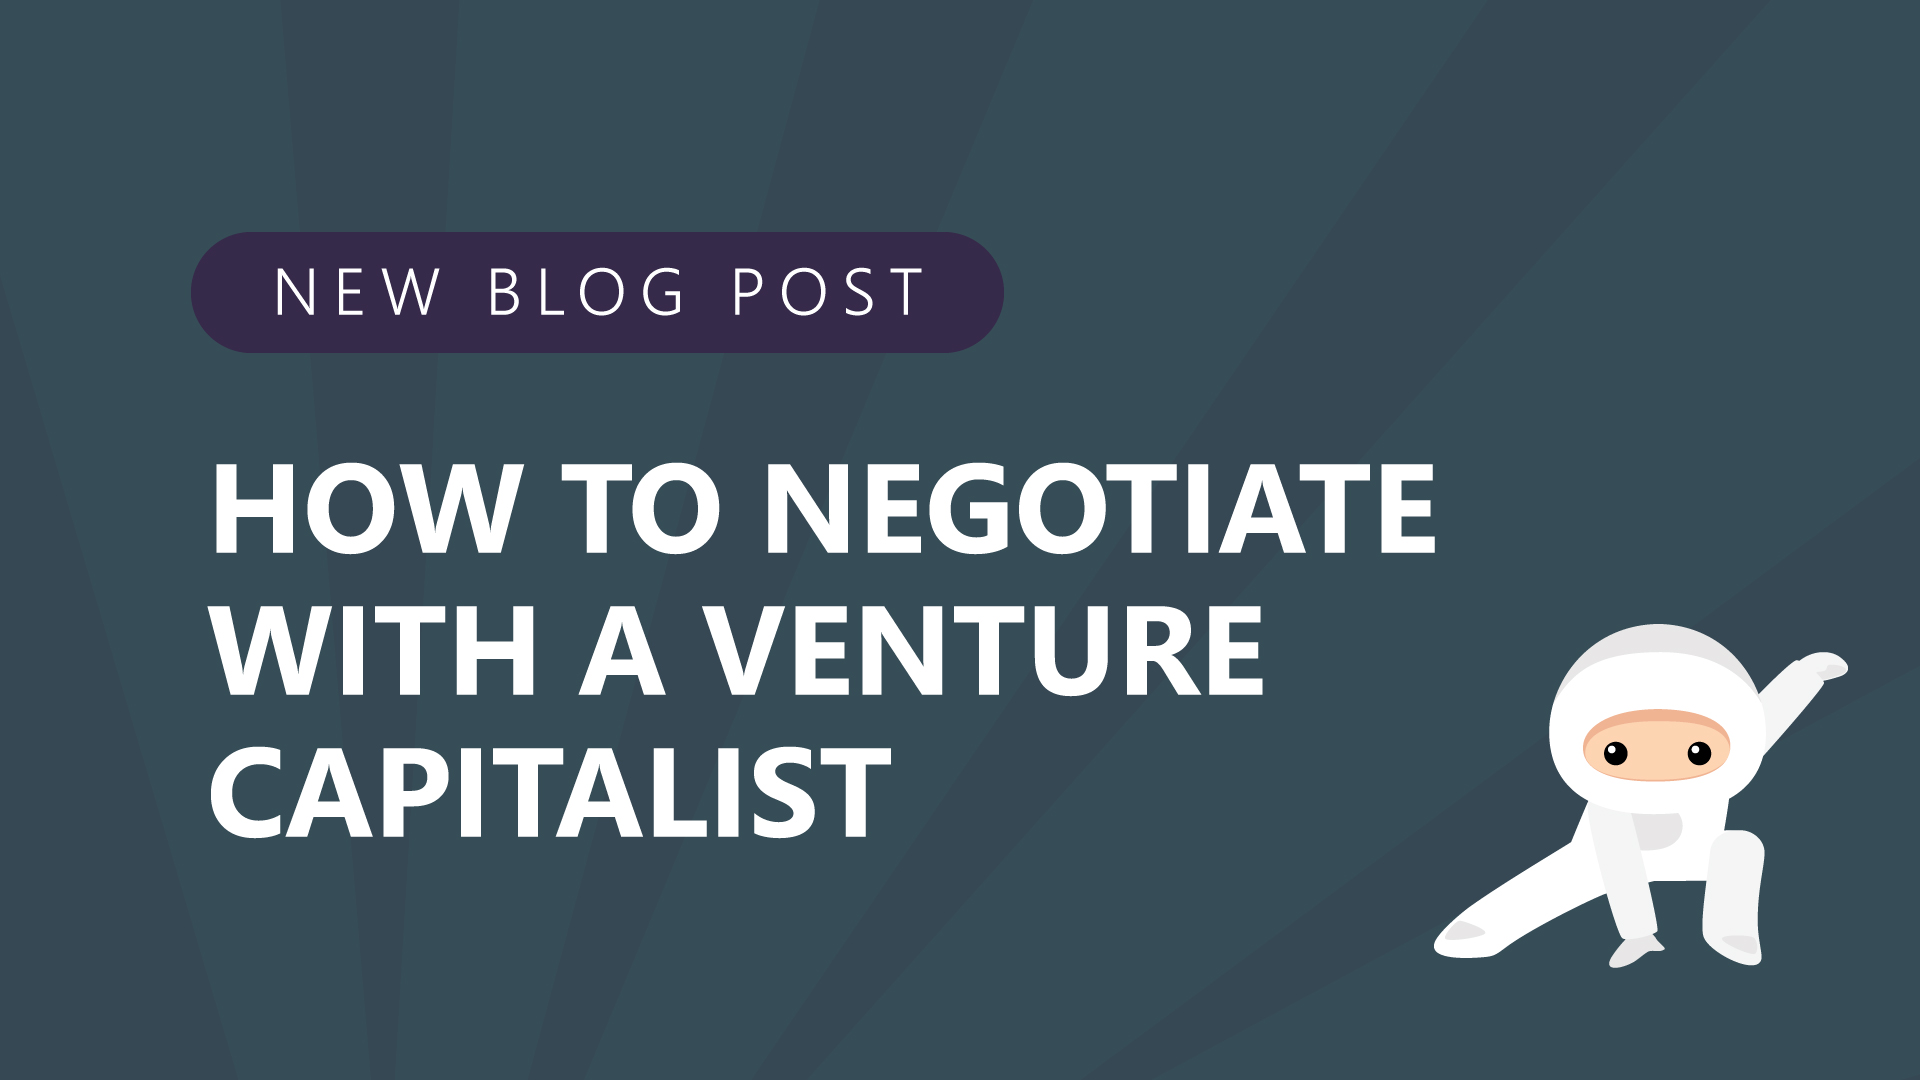 38-How-to-Negotiate-with-a-Venture-Capitalist.jpg